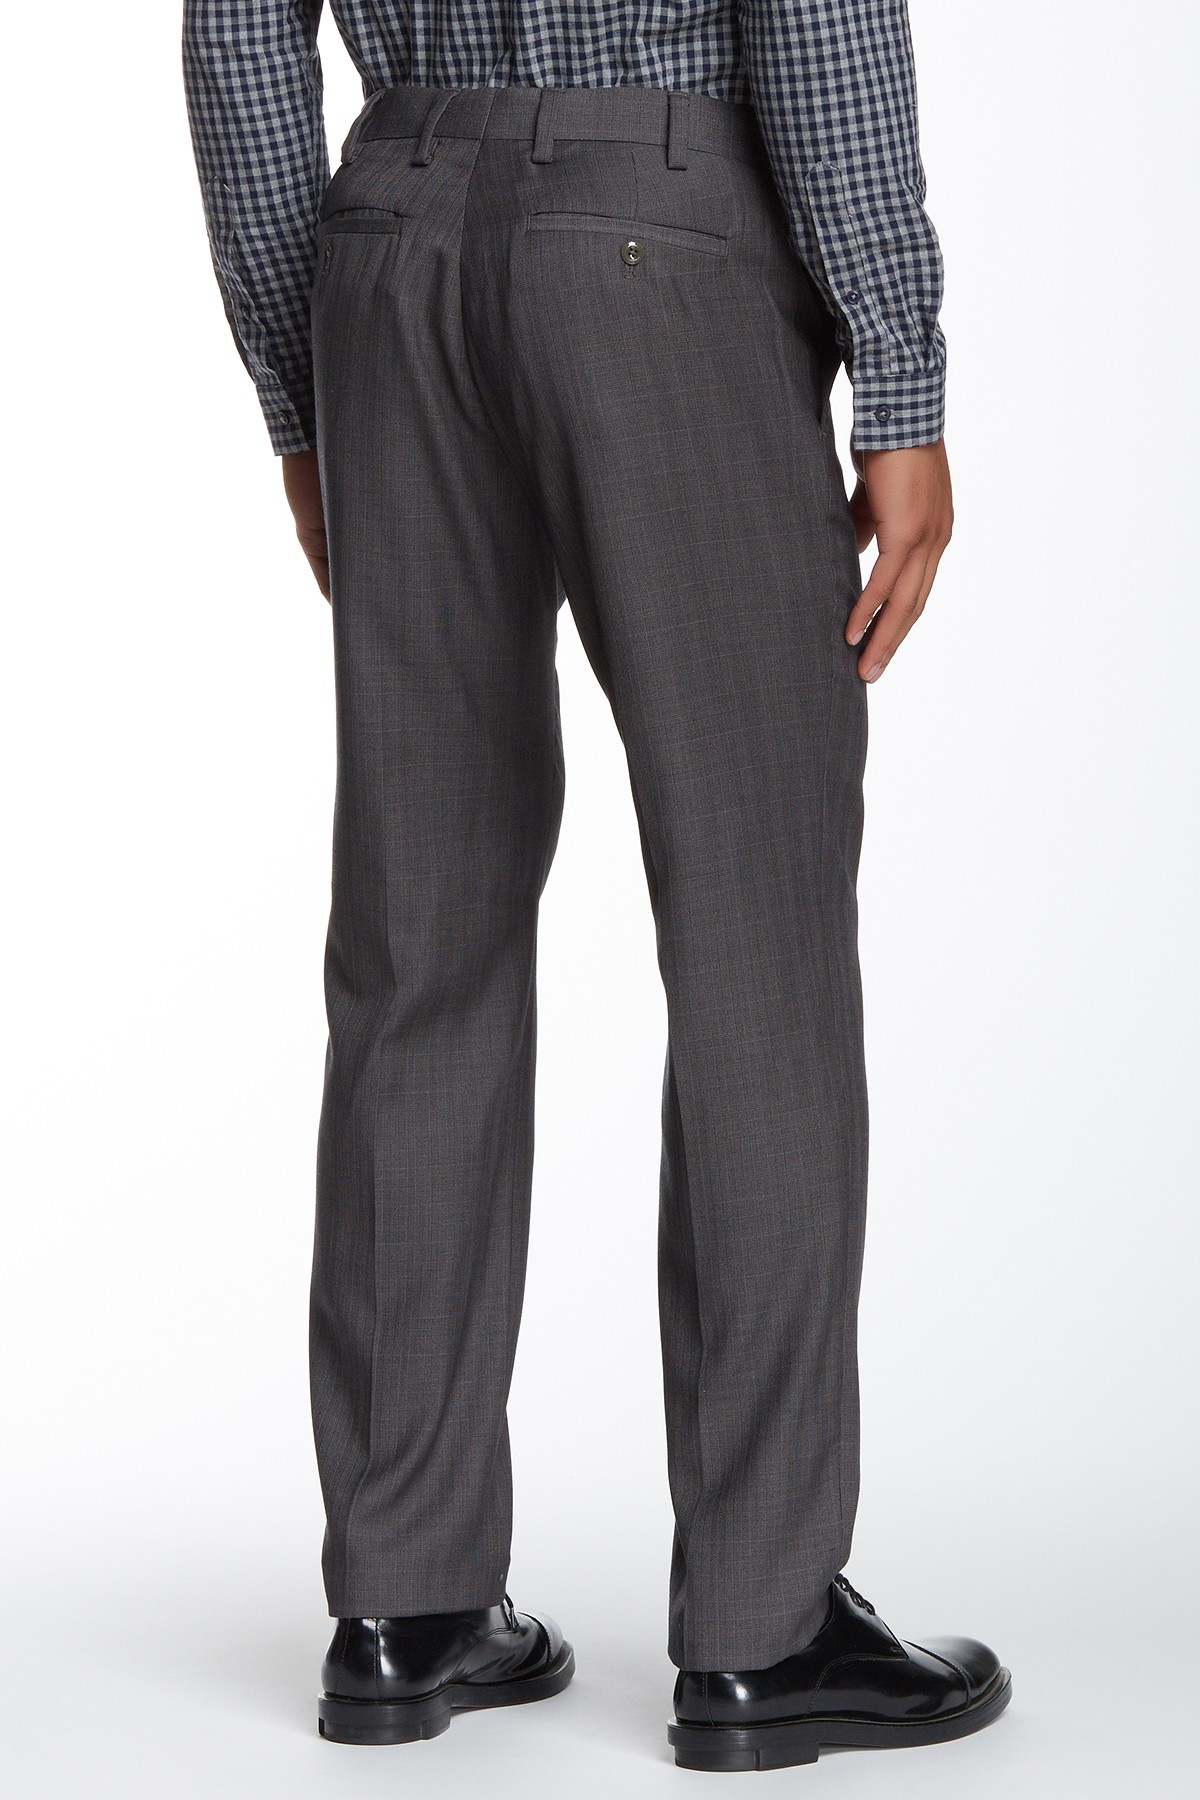 Lyst - Louis Raphael Modern Fit Manchester Plaid Pant in Gray for Men